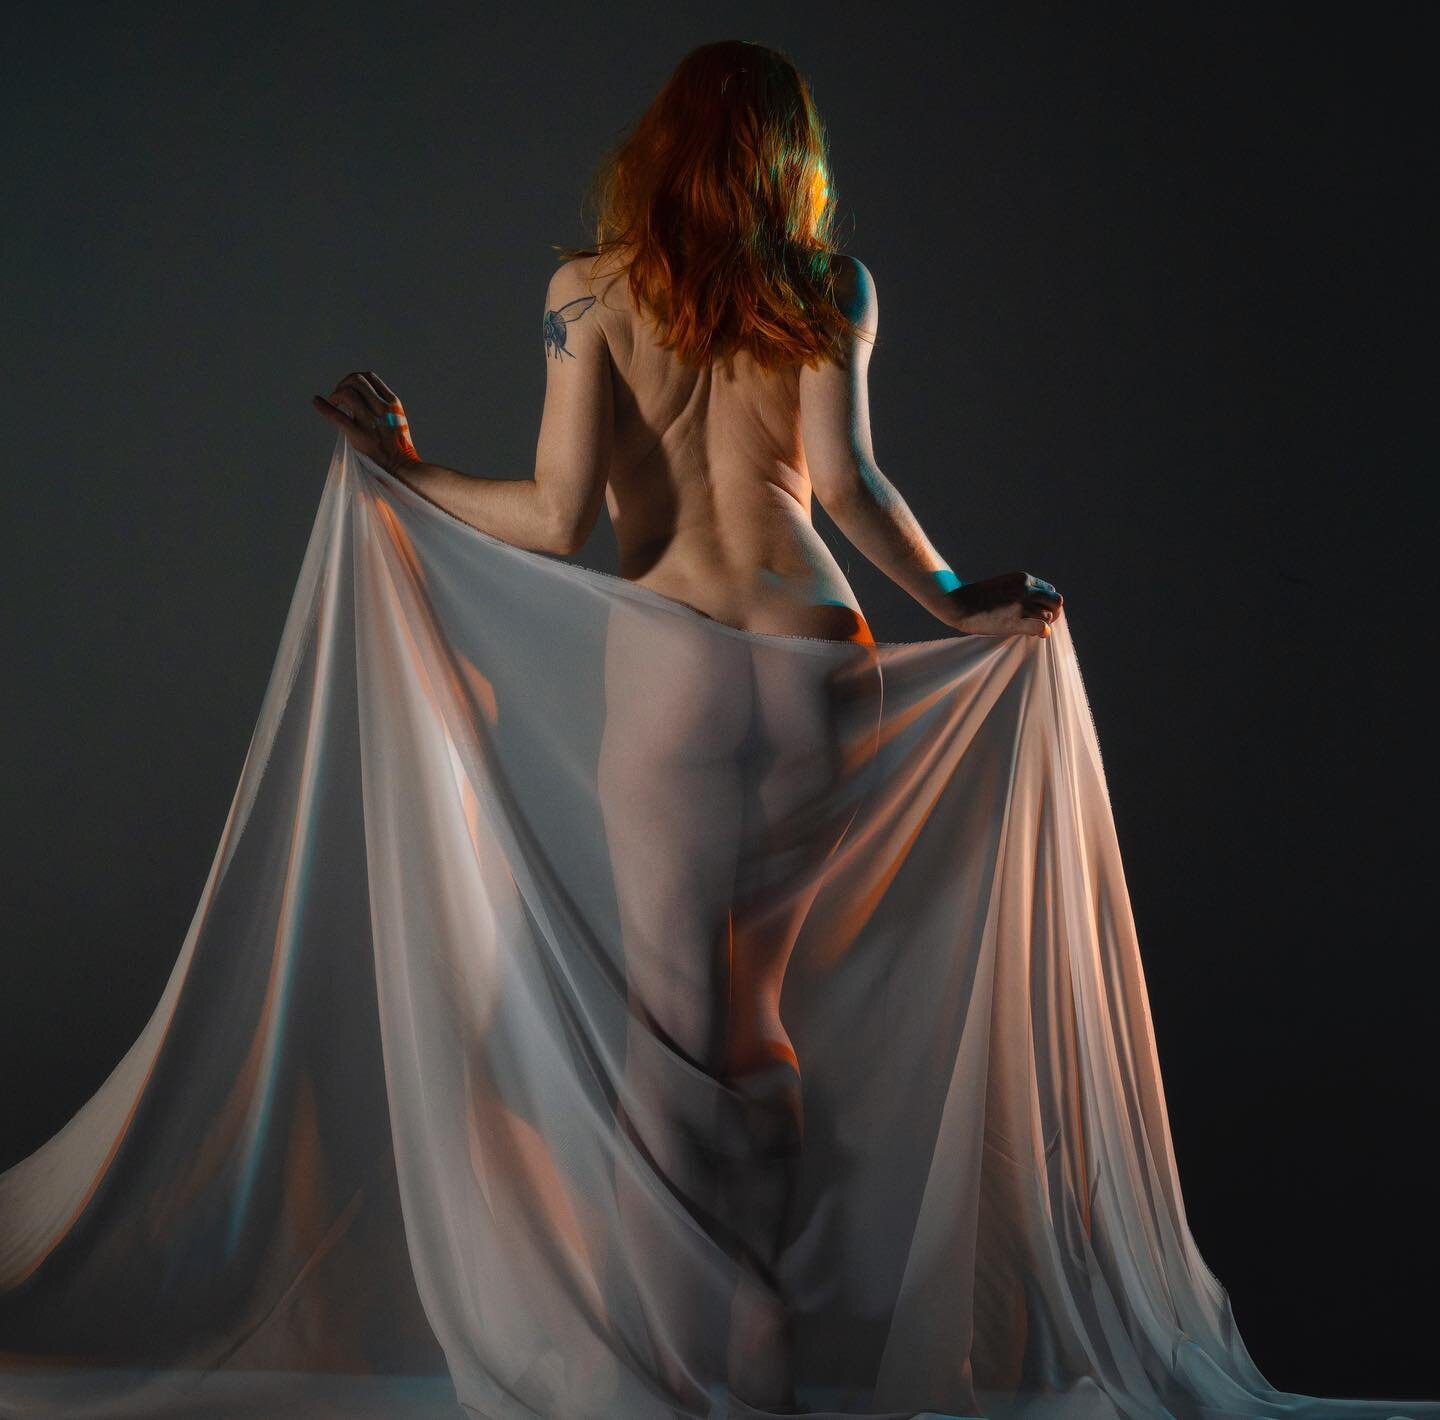 @melancholic_model is always such a joy to collaborate with on projects 

#dmvphotographer #beauty #glamour #drape